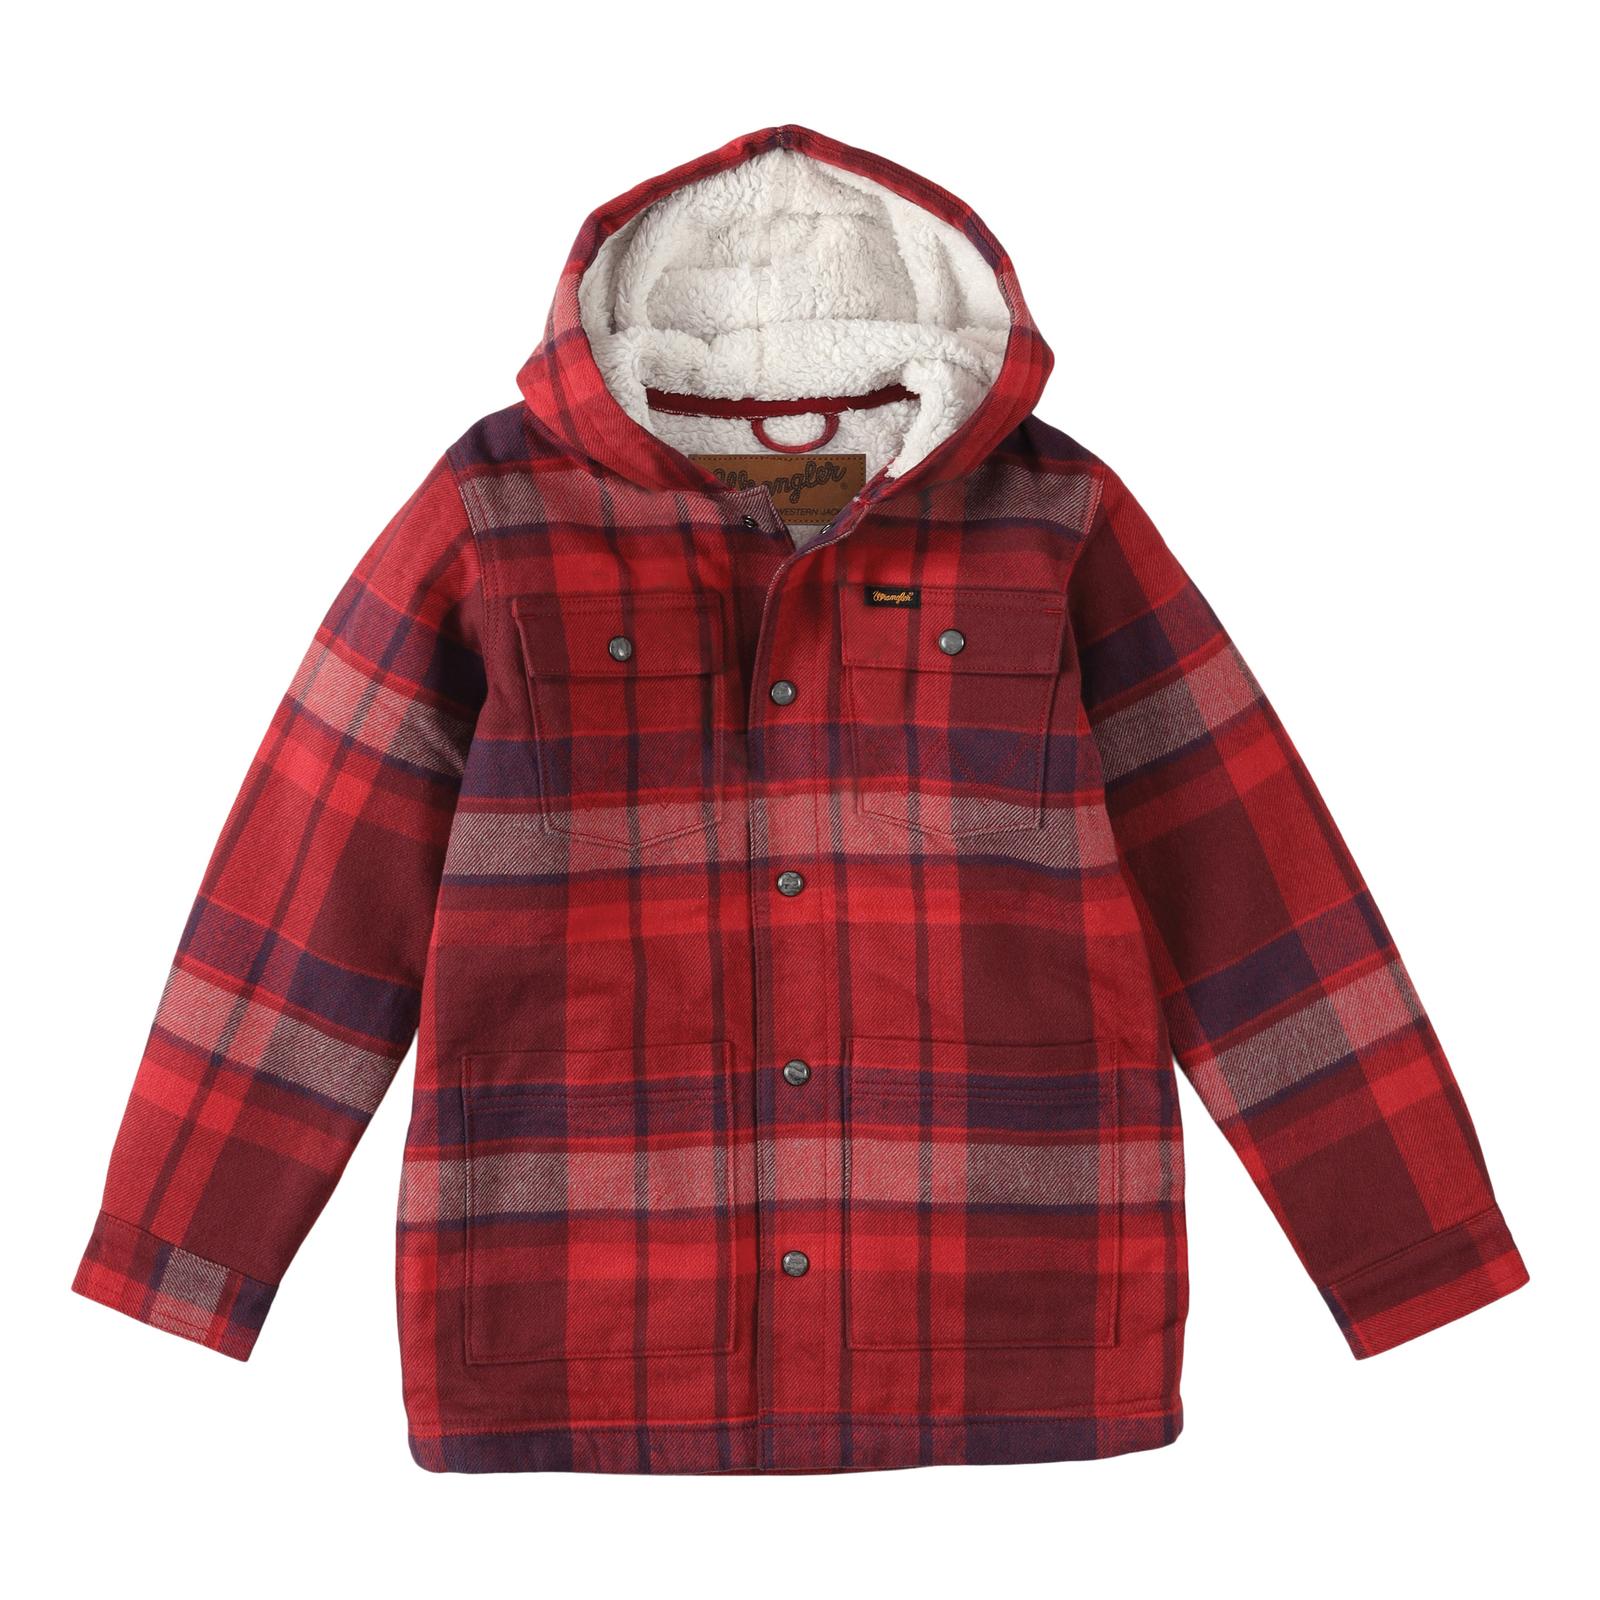 Wrangler Boy's Sherpa Lined Flannel Hooded Shirt Jacket STYLE 112335636